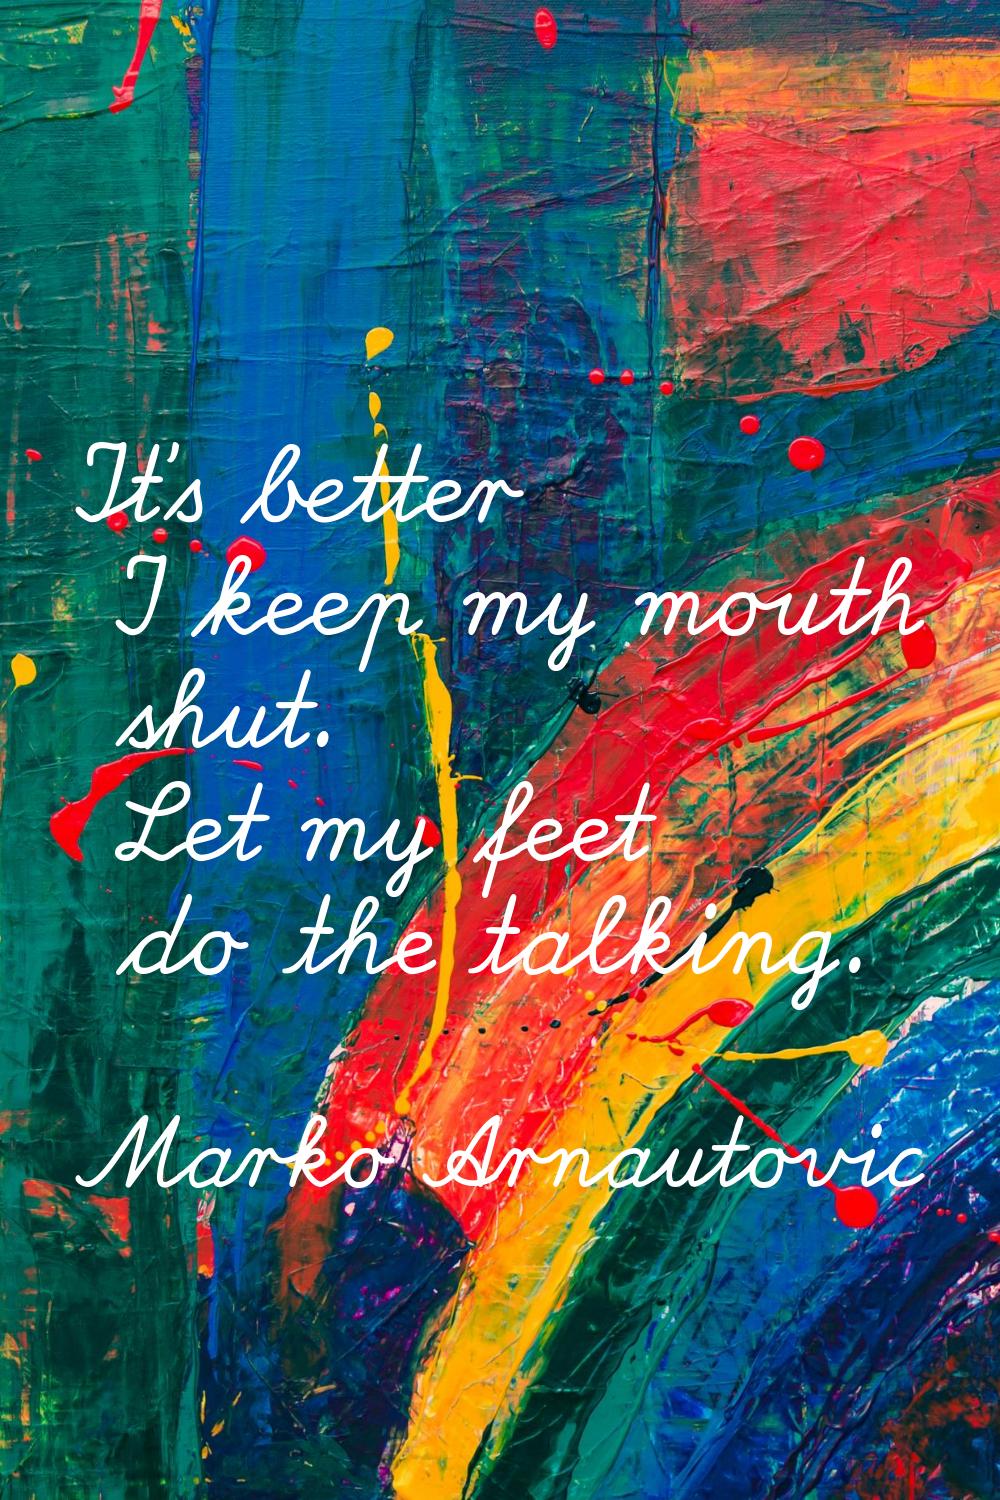 It's better I keep my mouth shut. Let my feet do the talking.